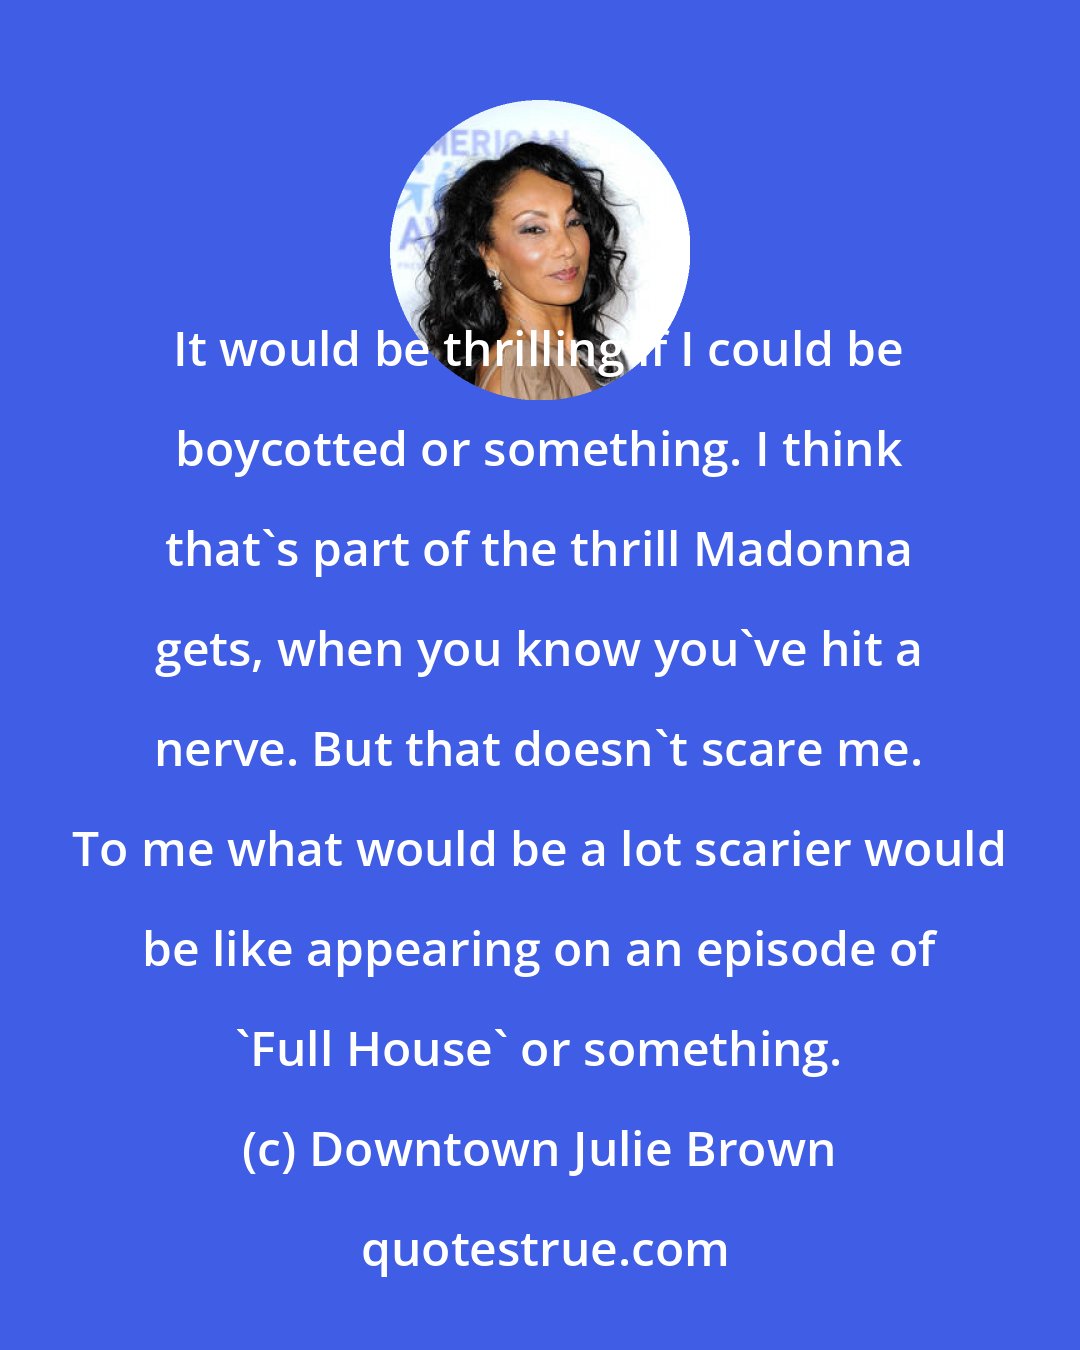 Downtown Julie Brown: It would be thrilling if I could be boycotted or something. I think that's part of the thrill Madonna gets, when you know you've hit a nerve. But that doesn't scare me. To me what would be a lot scarier would be like appearing on an episode of 'Full House' or something.